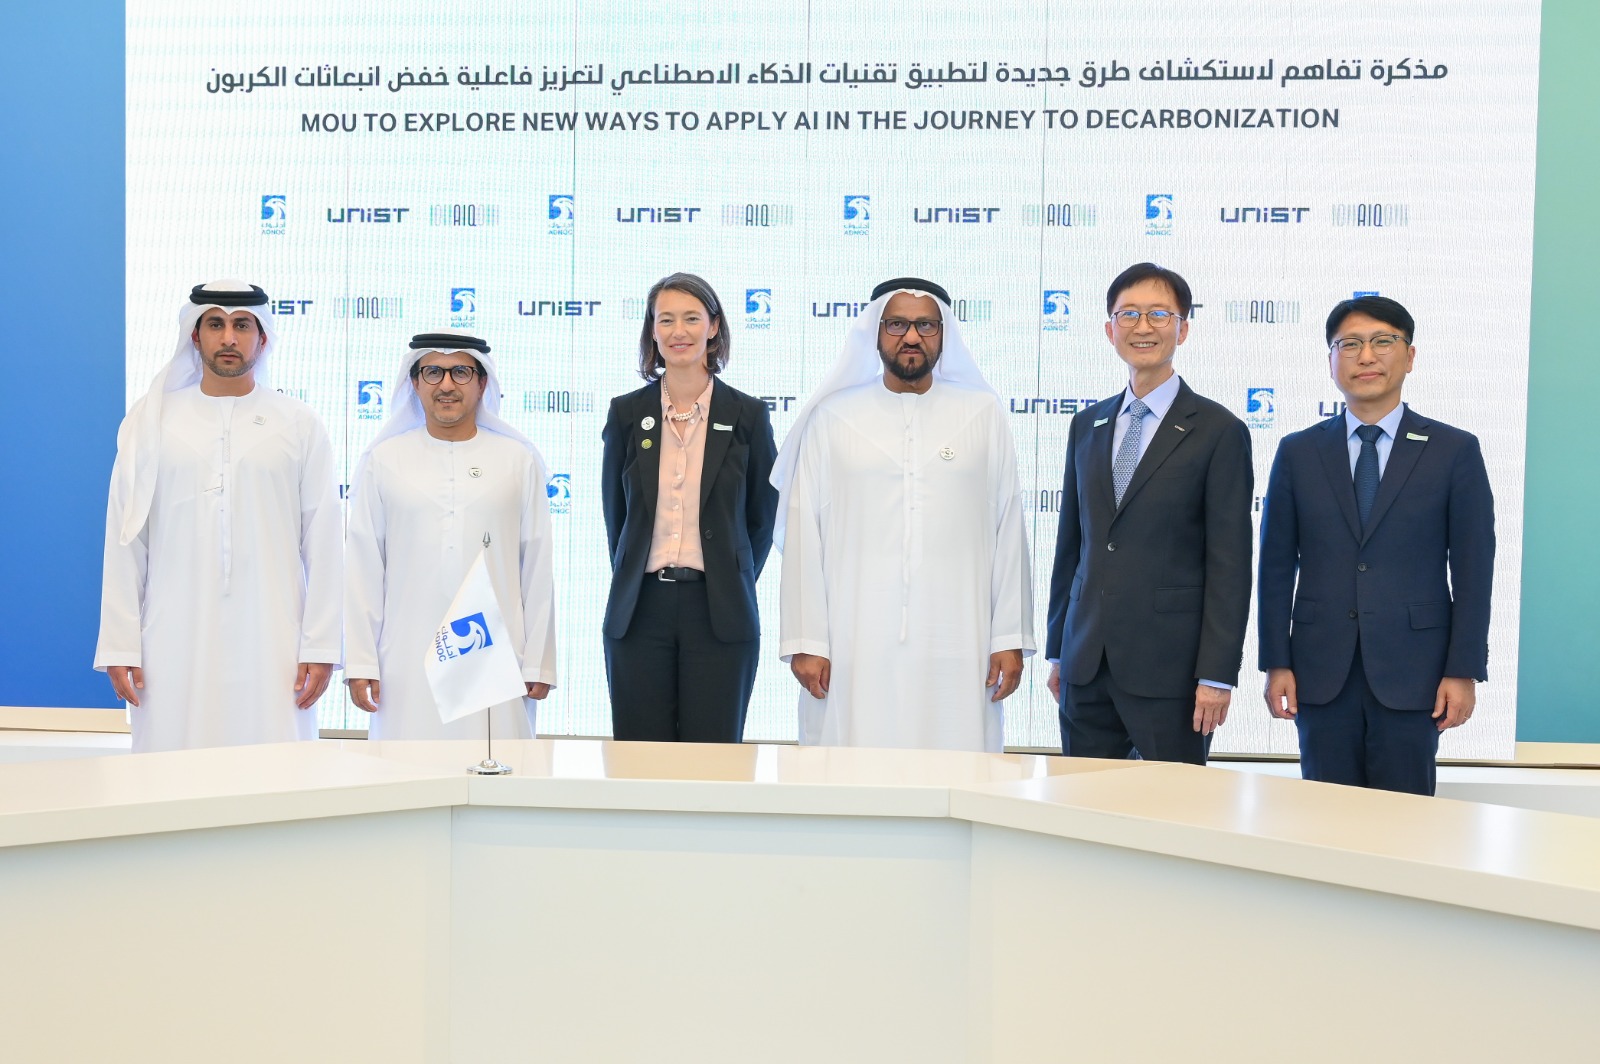 From left are AIQ CEO Omar Al Marzooqi, Executive Director Musabbeh Al Kaabi of Low Carbon Solutions & International Growth, CTO Sophie Hildebrand of ADNOC, Executive Director Abdulmunim Saif Al Kindy of ADNOC's Upstream Directorate, UNIST President Yong Hoon Lee, and Dean Hankwon Lim of UNIST Graduate School of Carbon Neutrality.